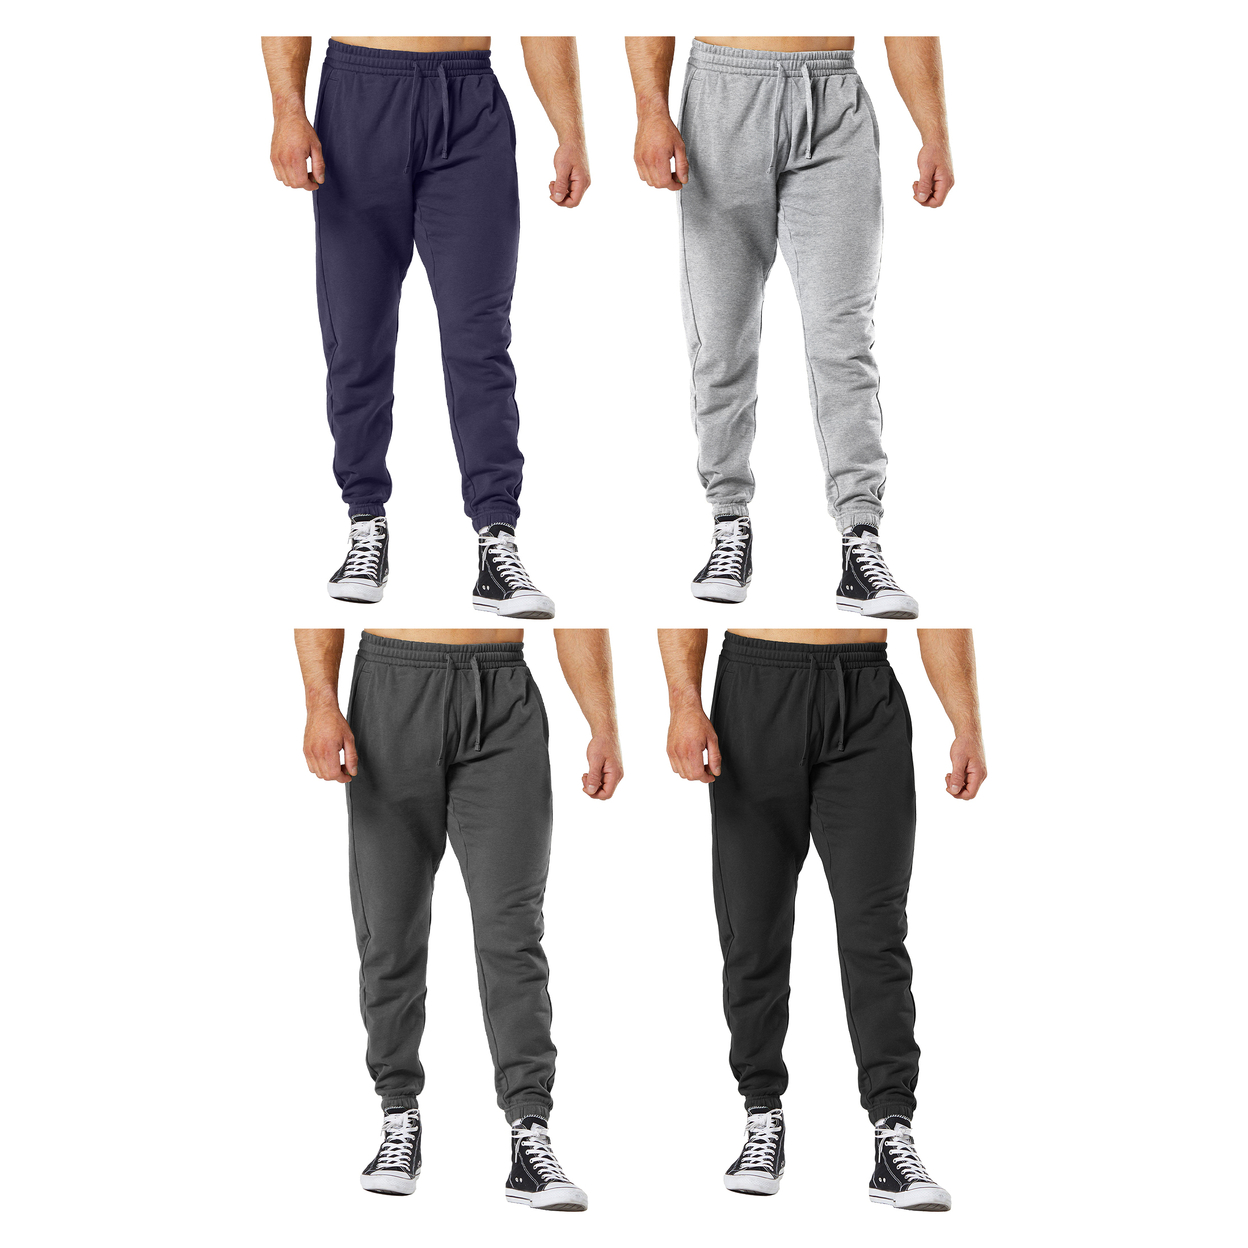 3-Pack: Men's Ultra-Soft Cozy Winter Warm Casual Fleece-Lined Sweatpants Jogger - Small